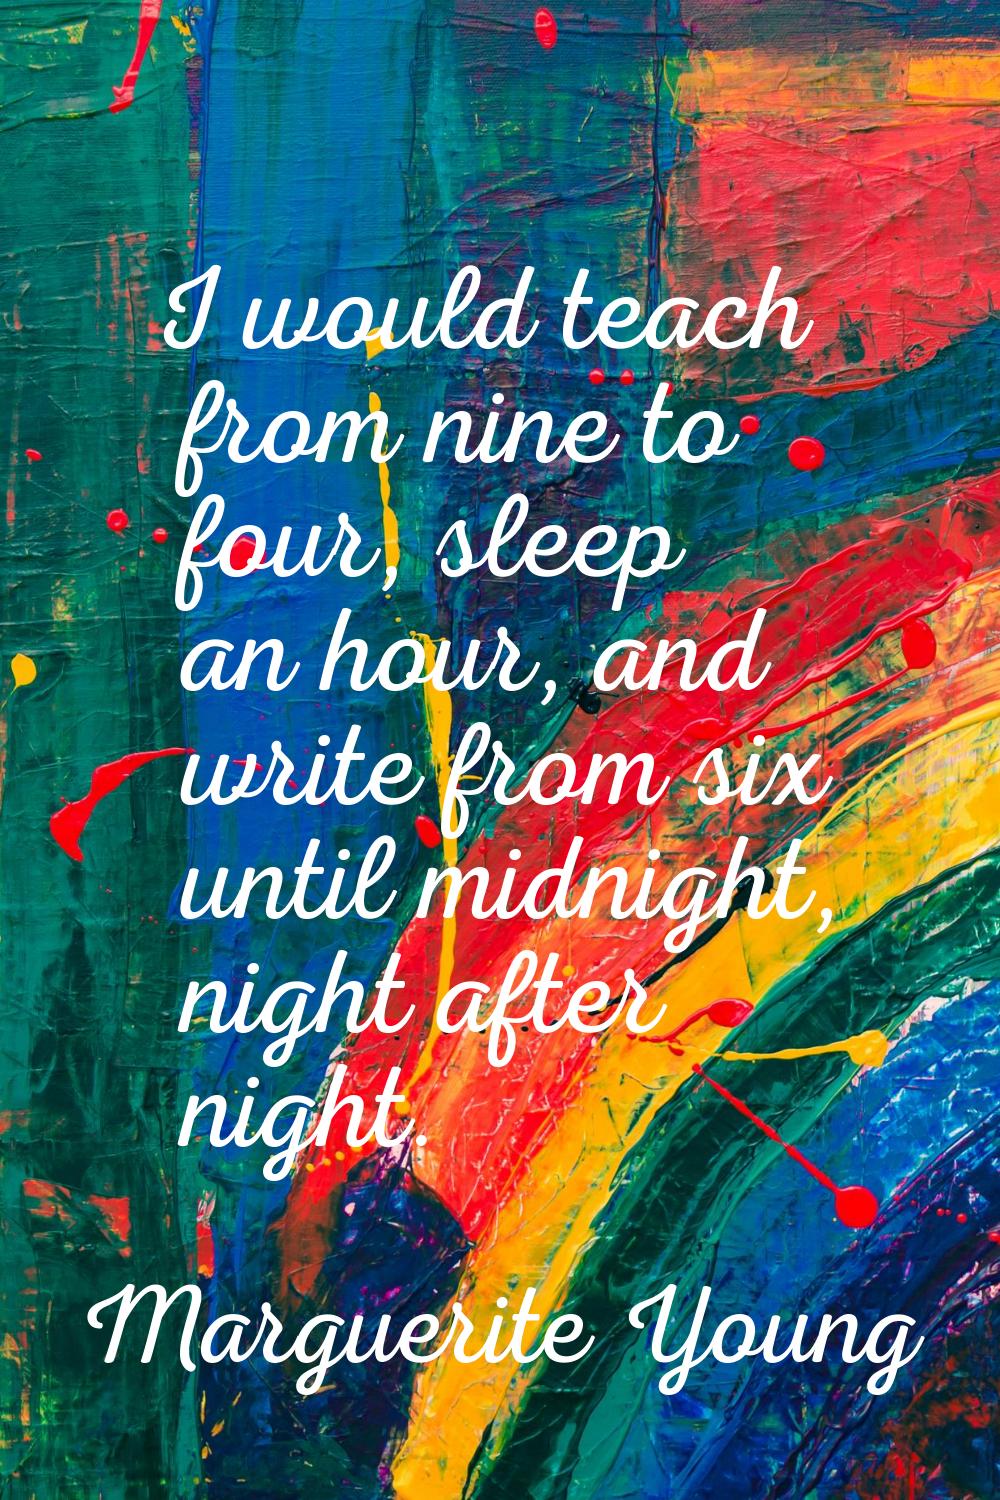 I would teach from nine to four, sleep an hour, and write from six until midnight, night after nigh